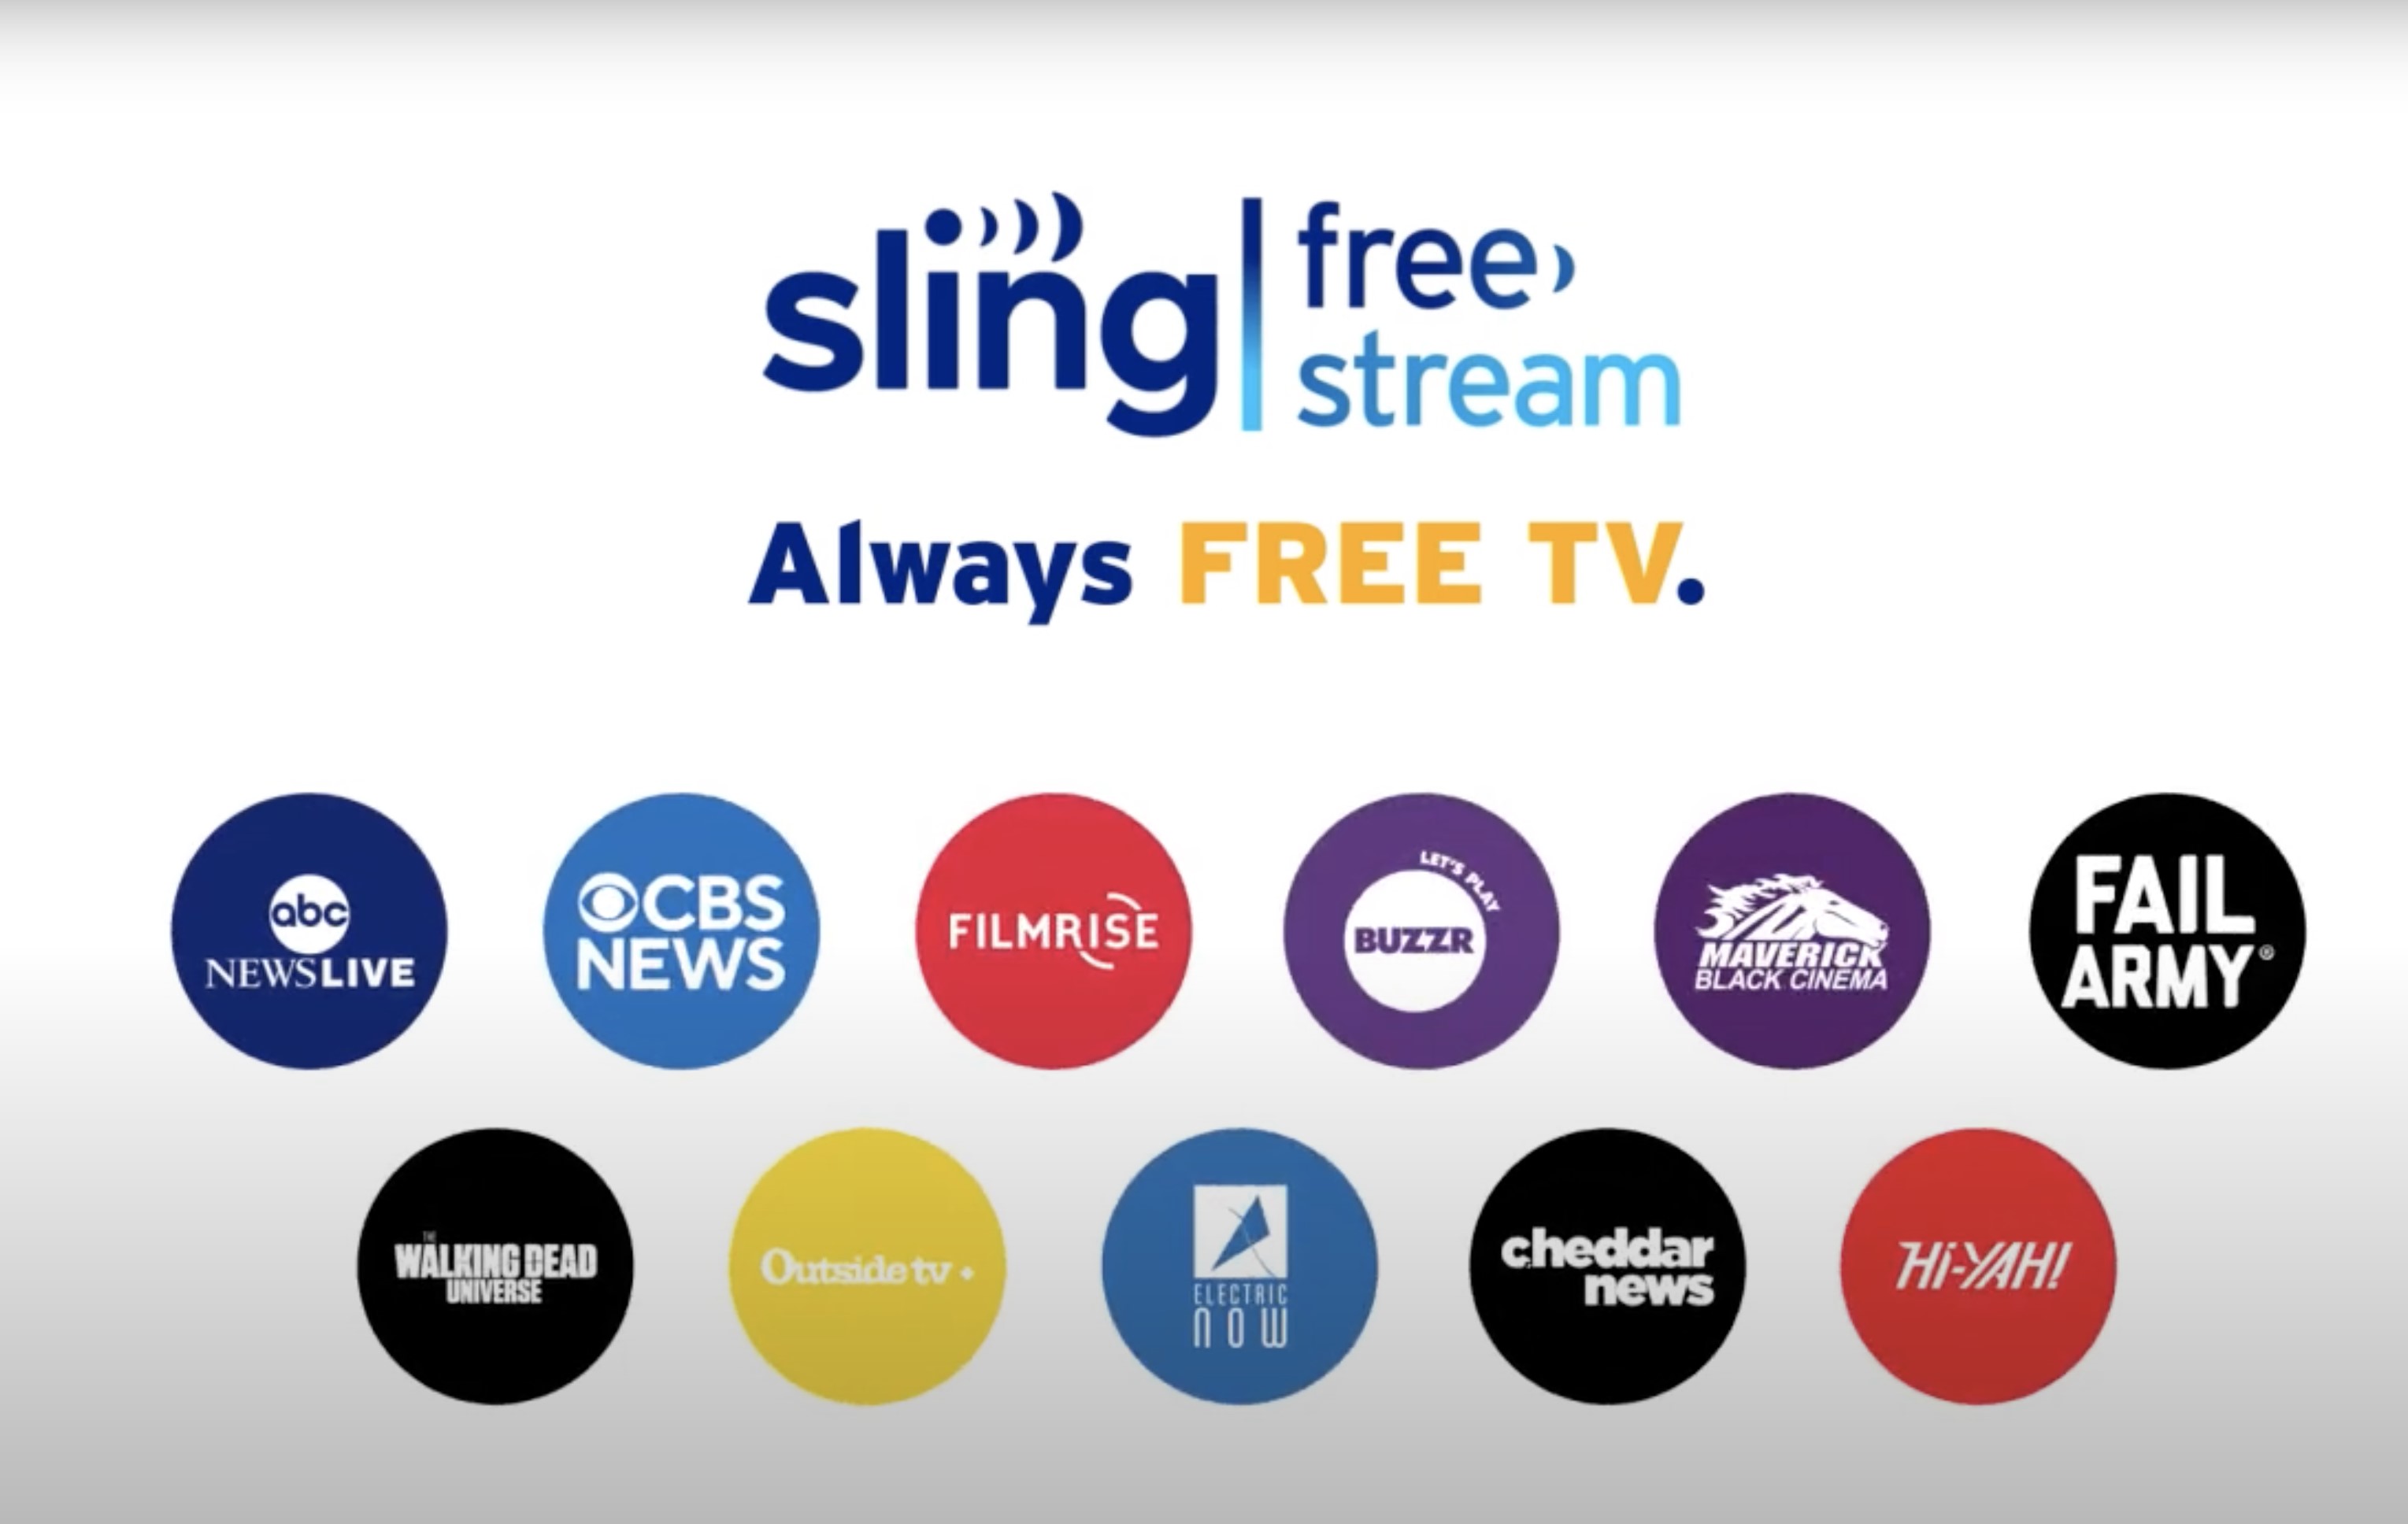 sling-tv-free-streaming-plan-rolls-out-with-ad-support